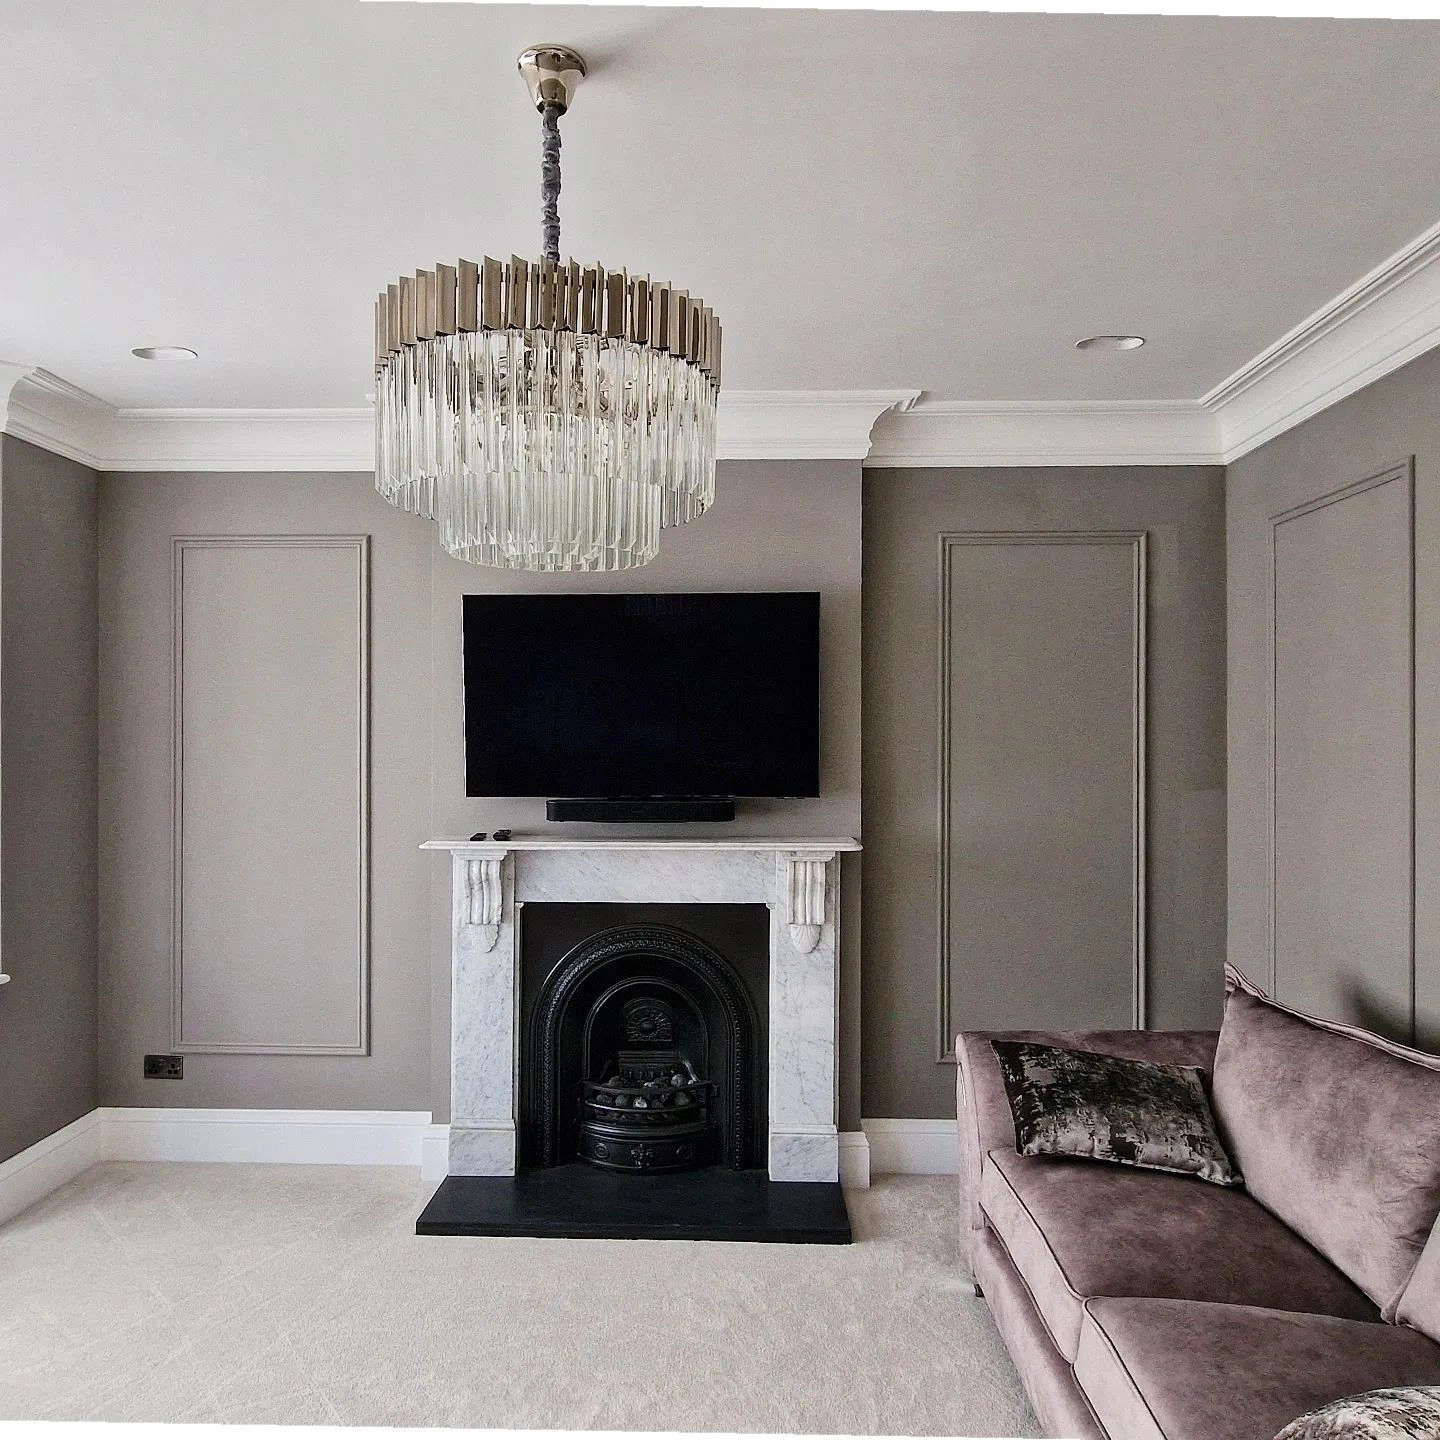 Farrow and Ball Worsted 284 living room interior